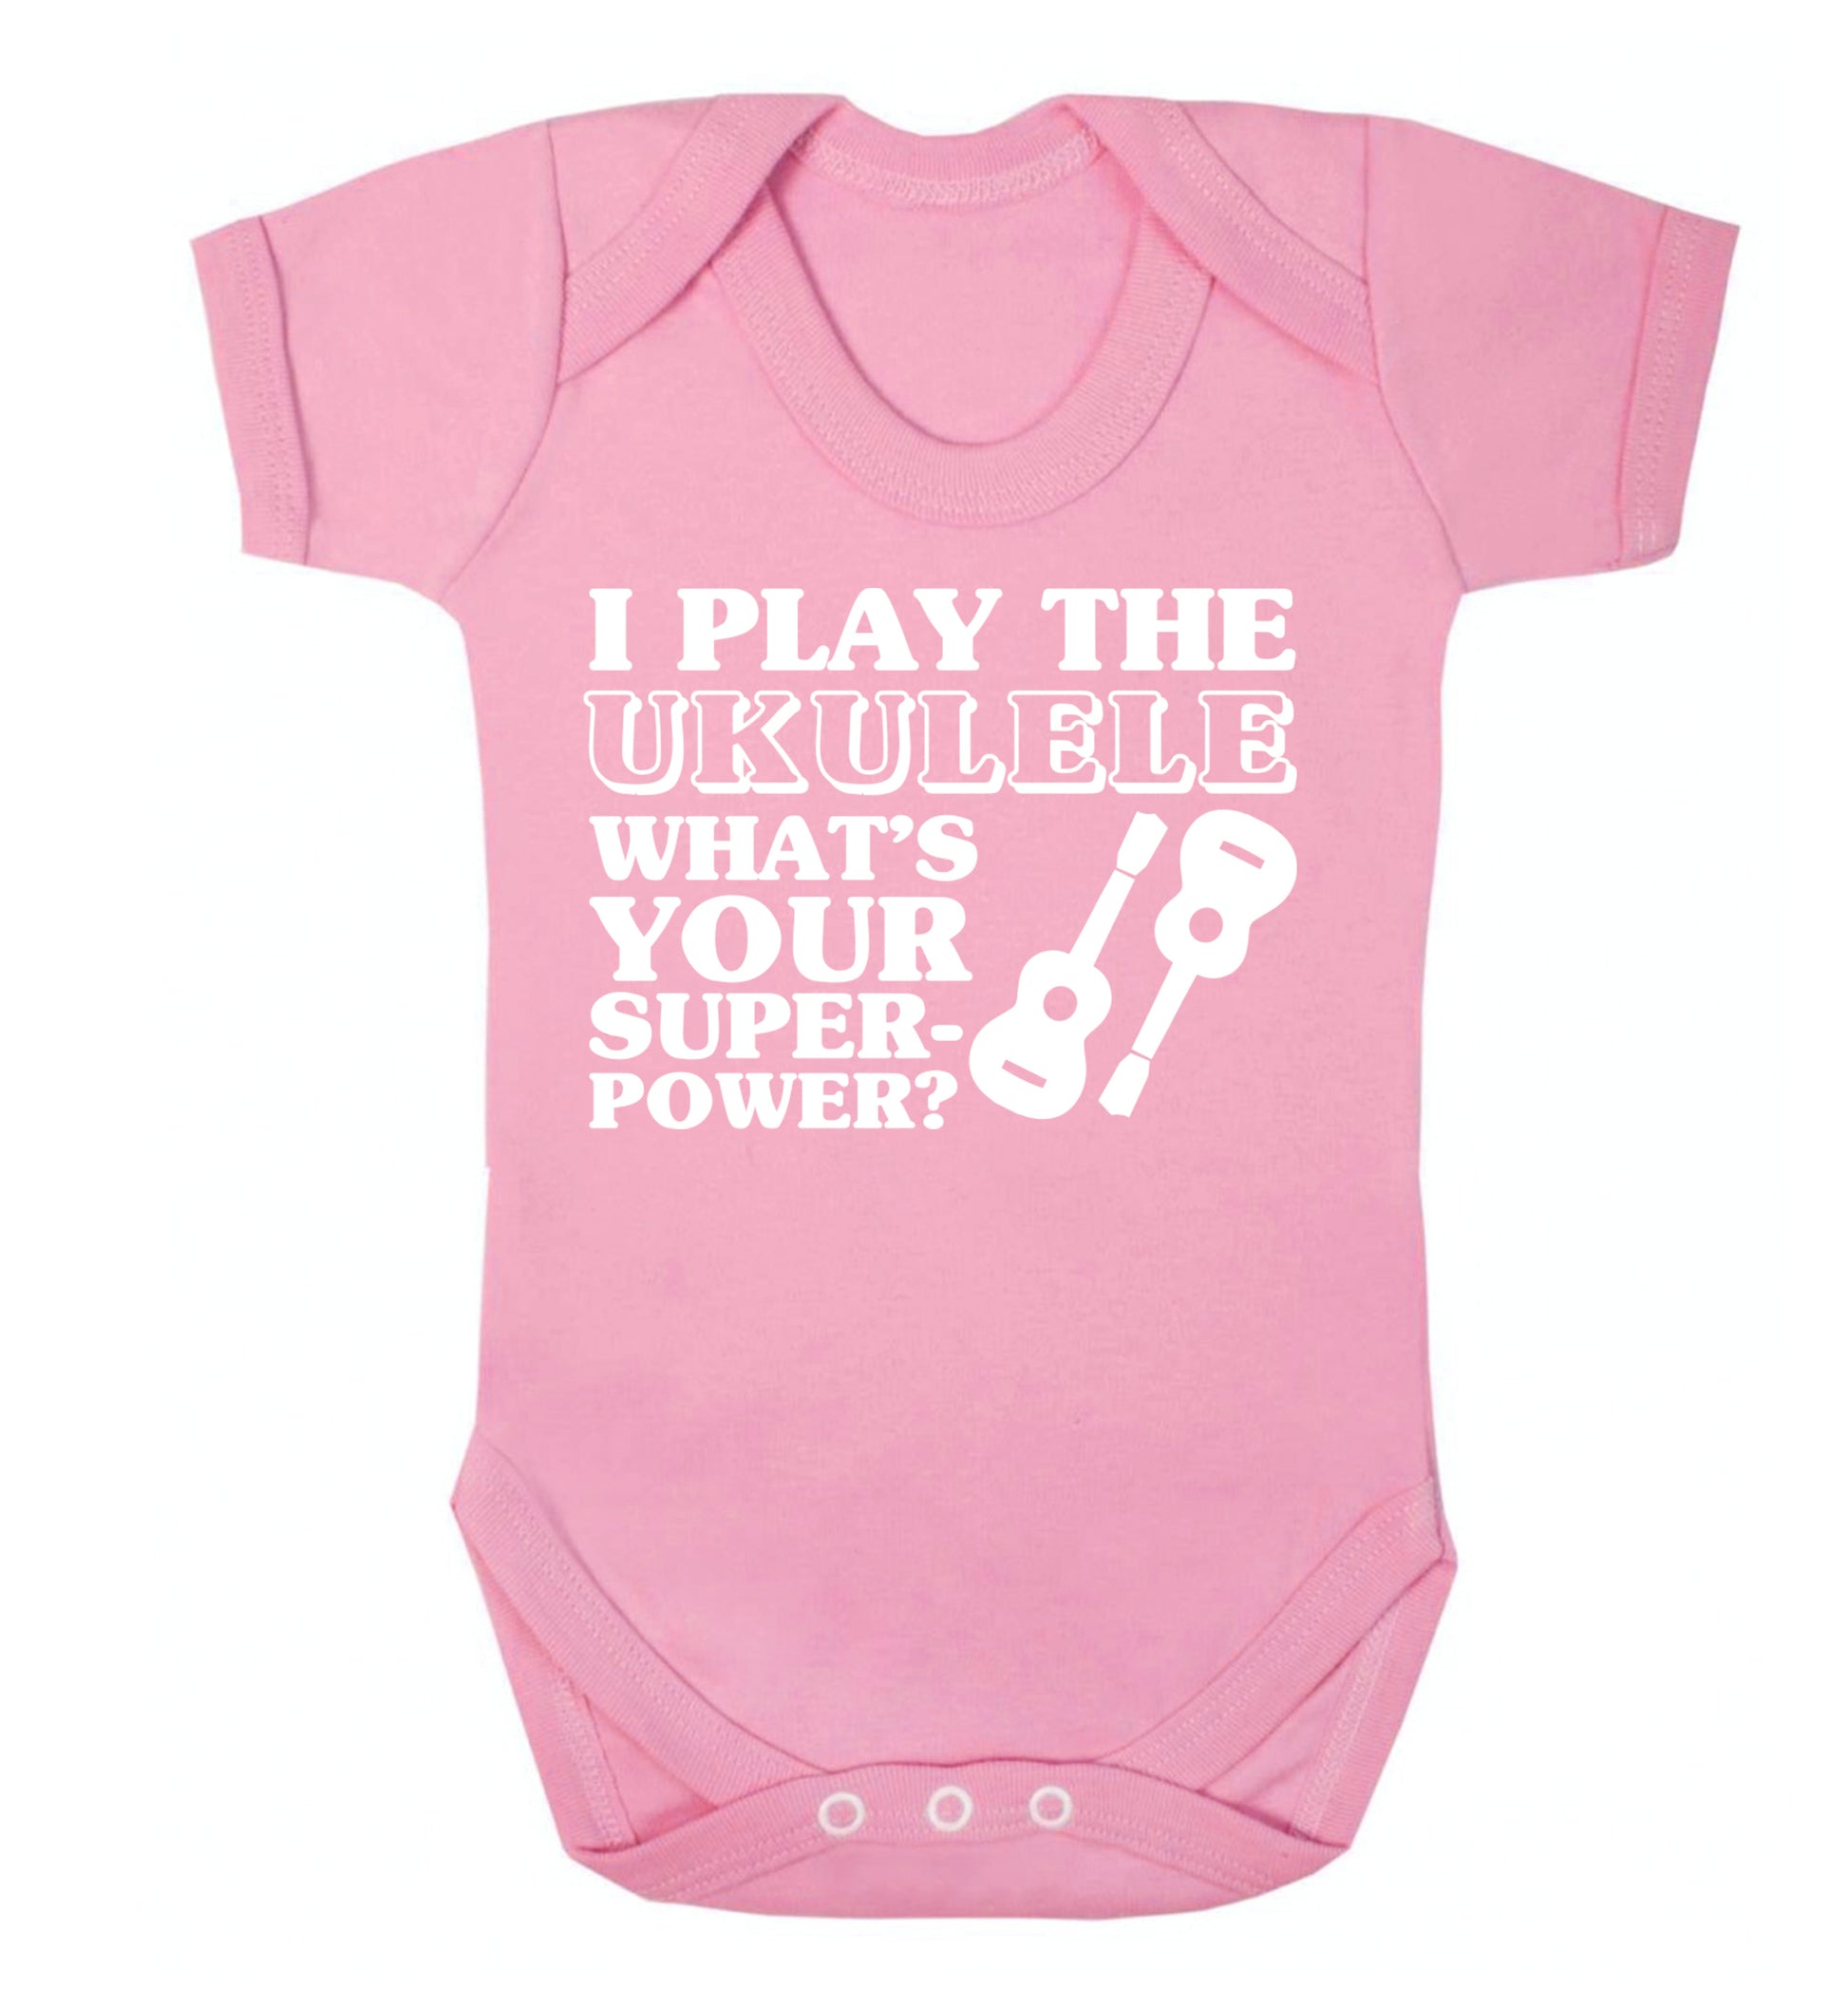 I play the ukulele what's your superpower? Baby Vest pale pink 18-24 months